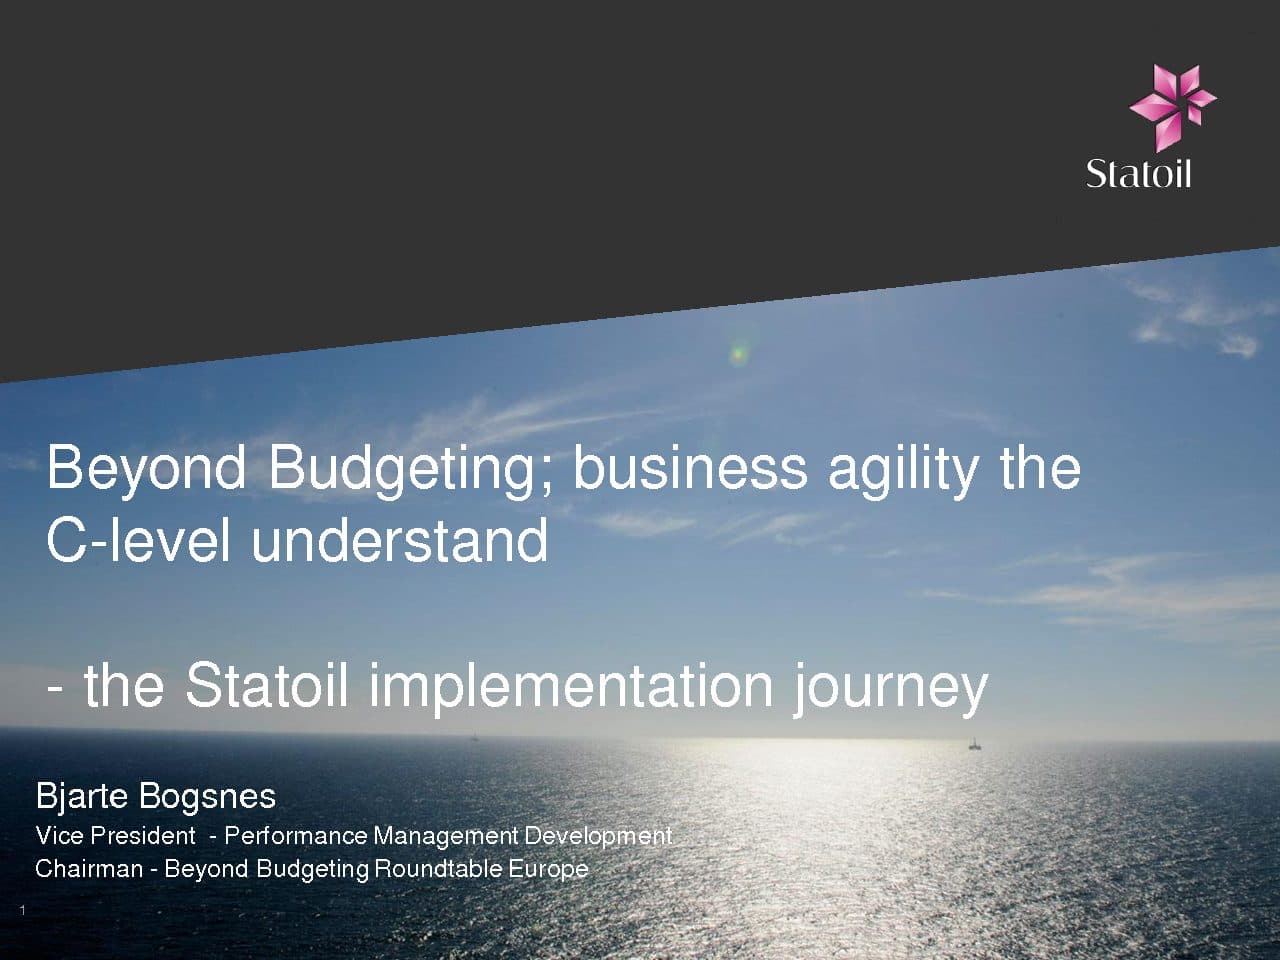 Beyond Budgeting – Business Agility the C-level Understand (and Are Starting to Like)